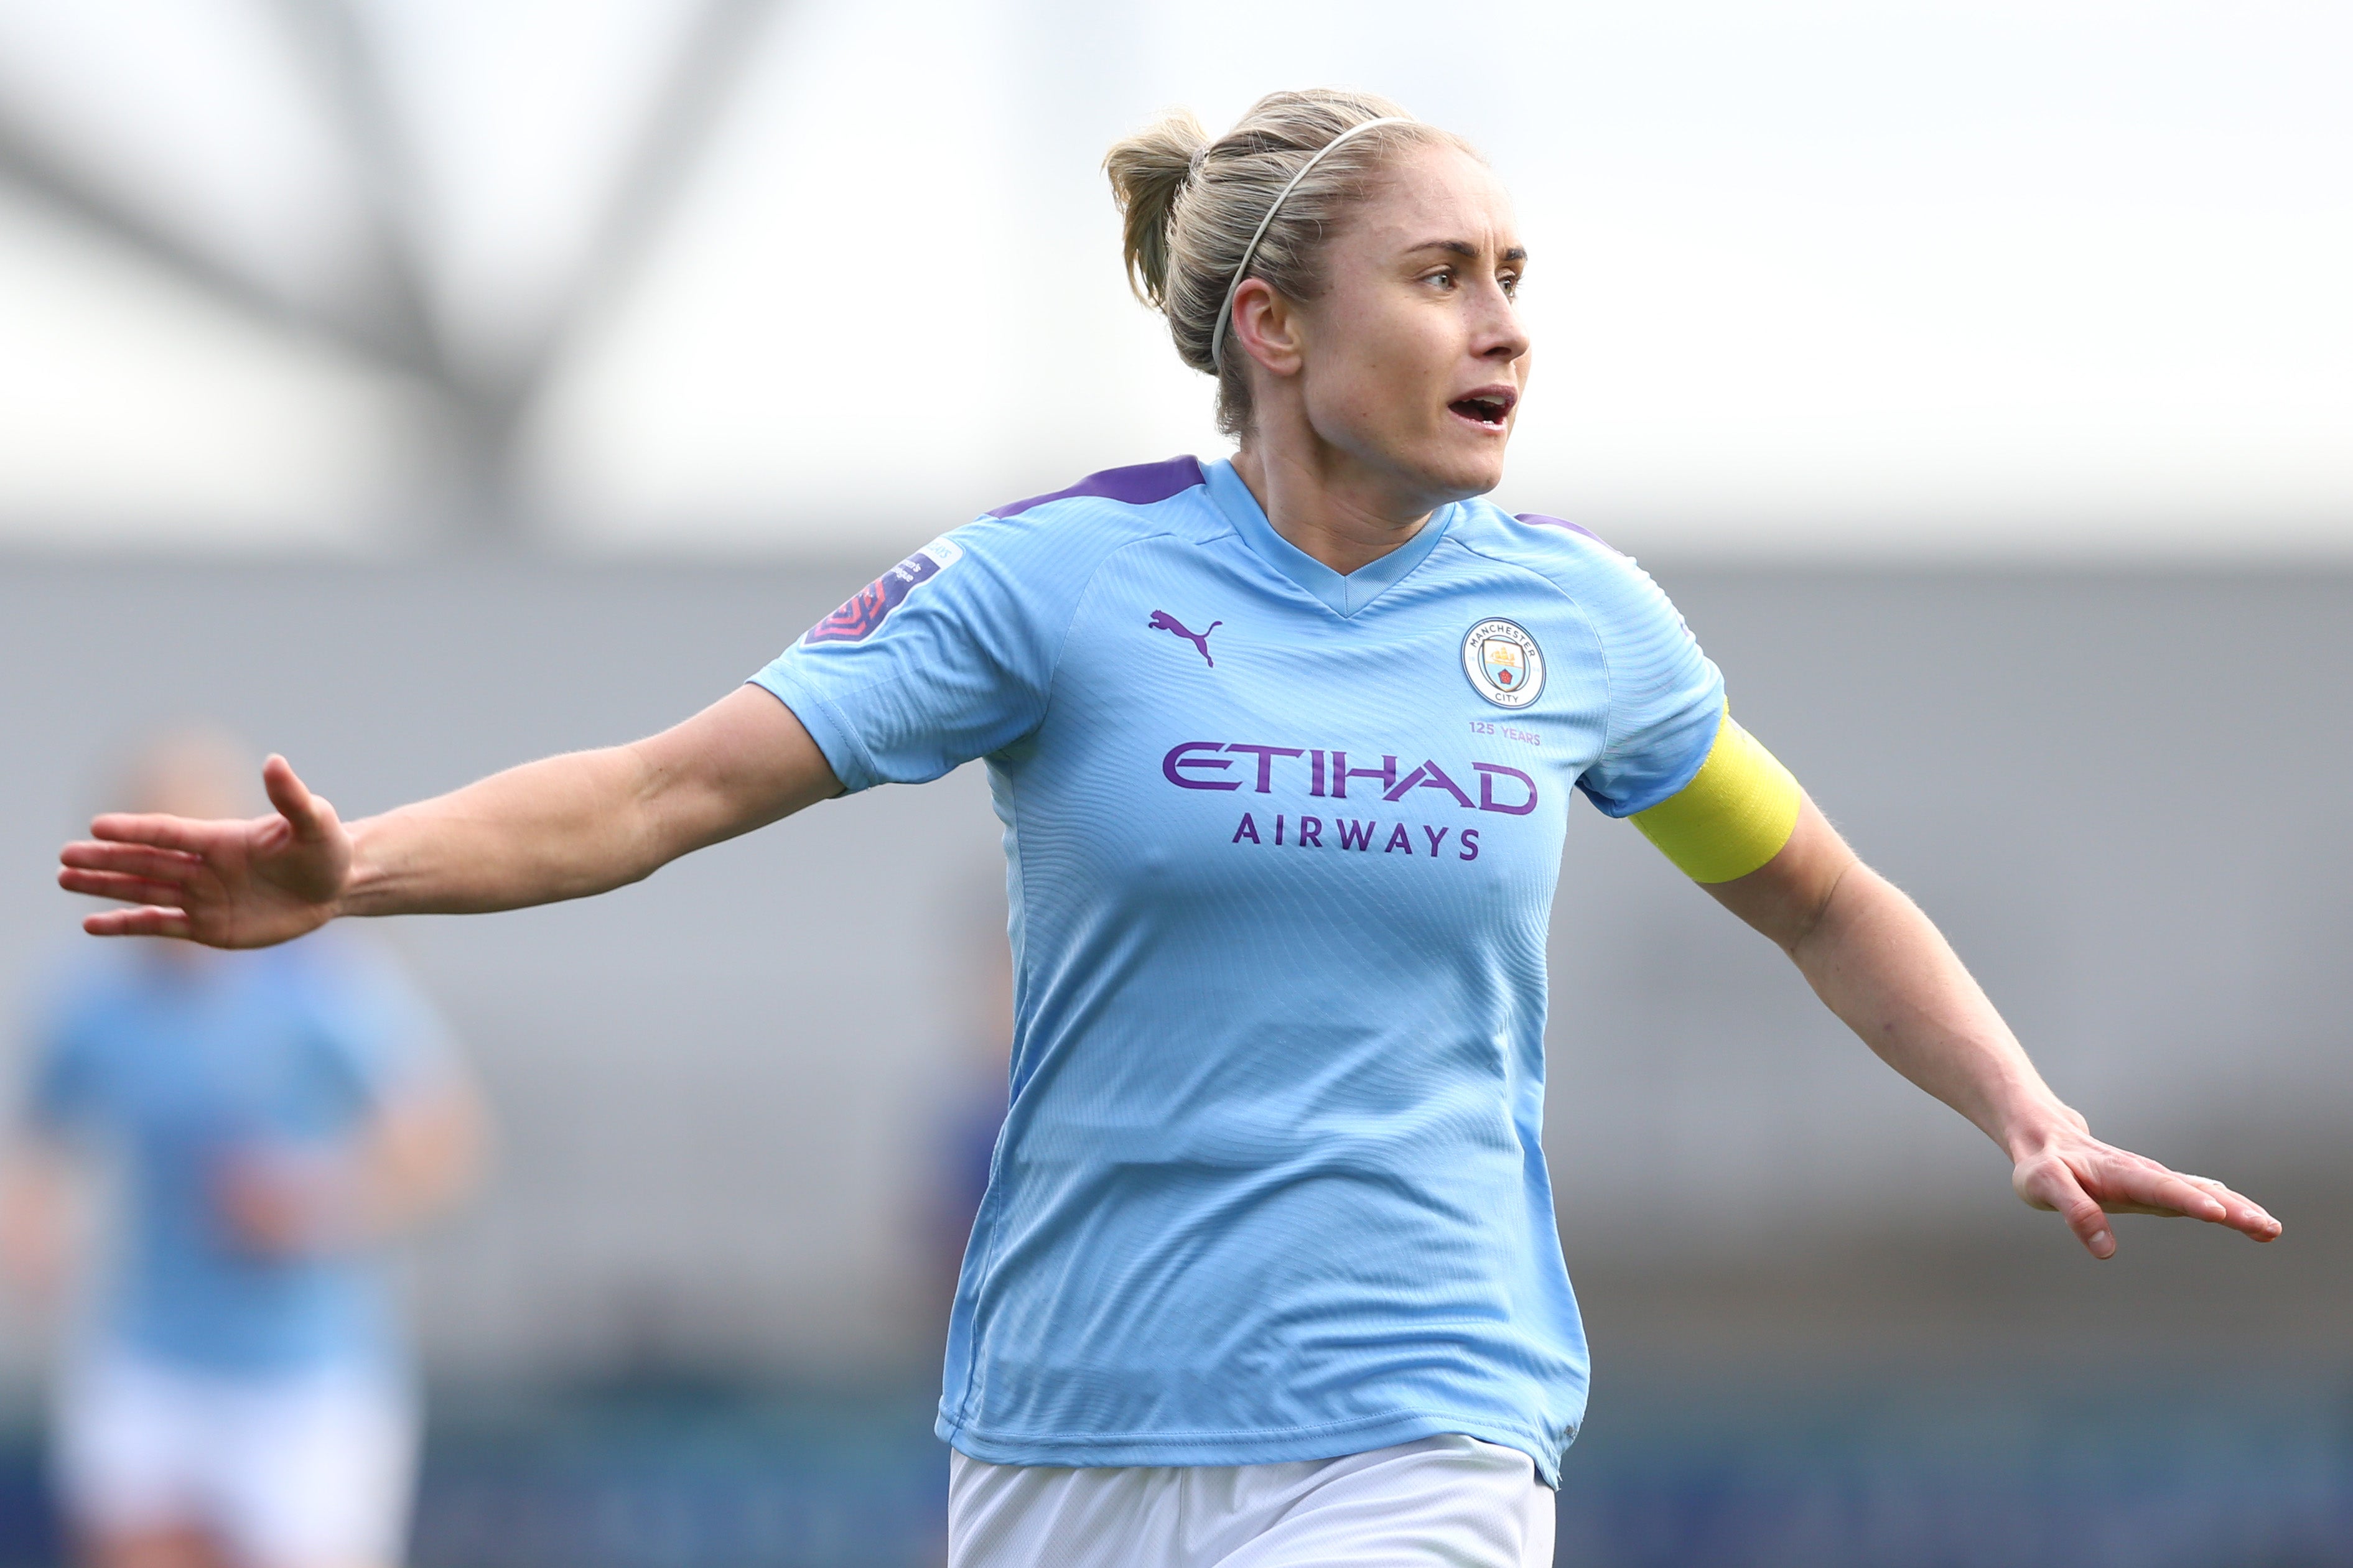 Houghton’s City were defeated by Spurs 2-1 on Sunday